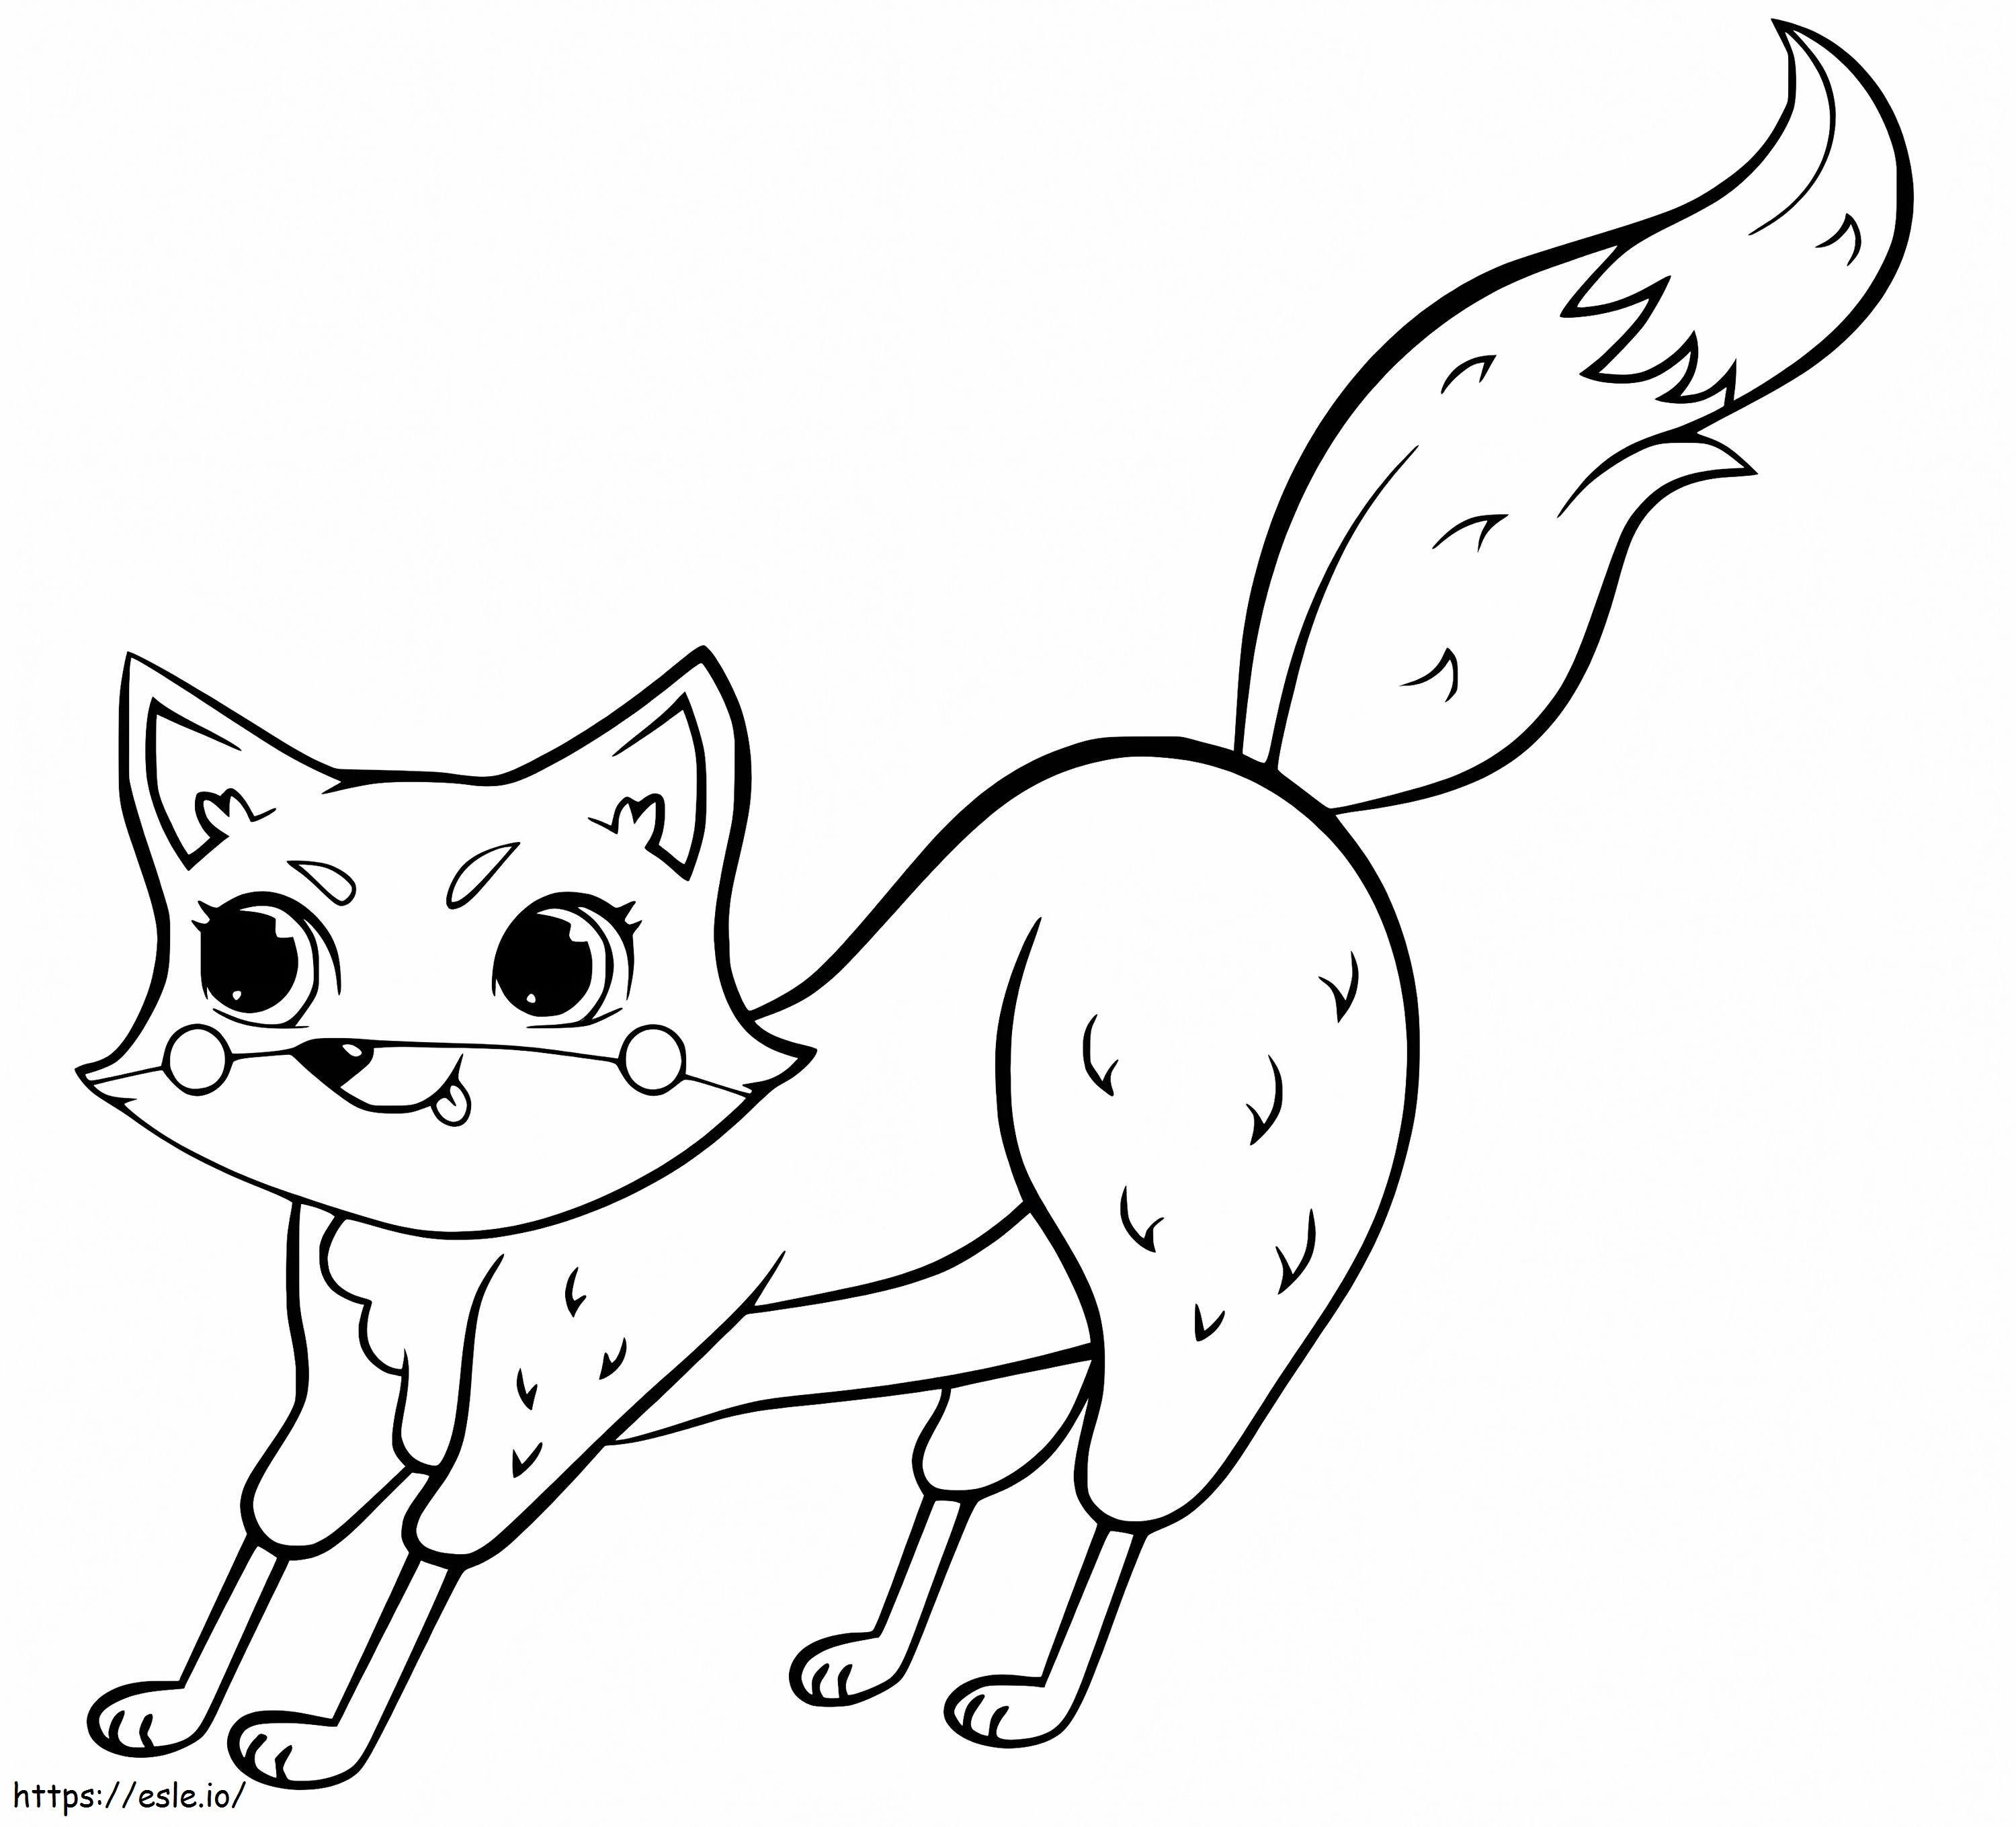 Cute Fox Stretch coloring page